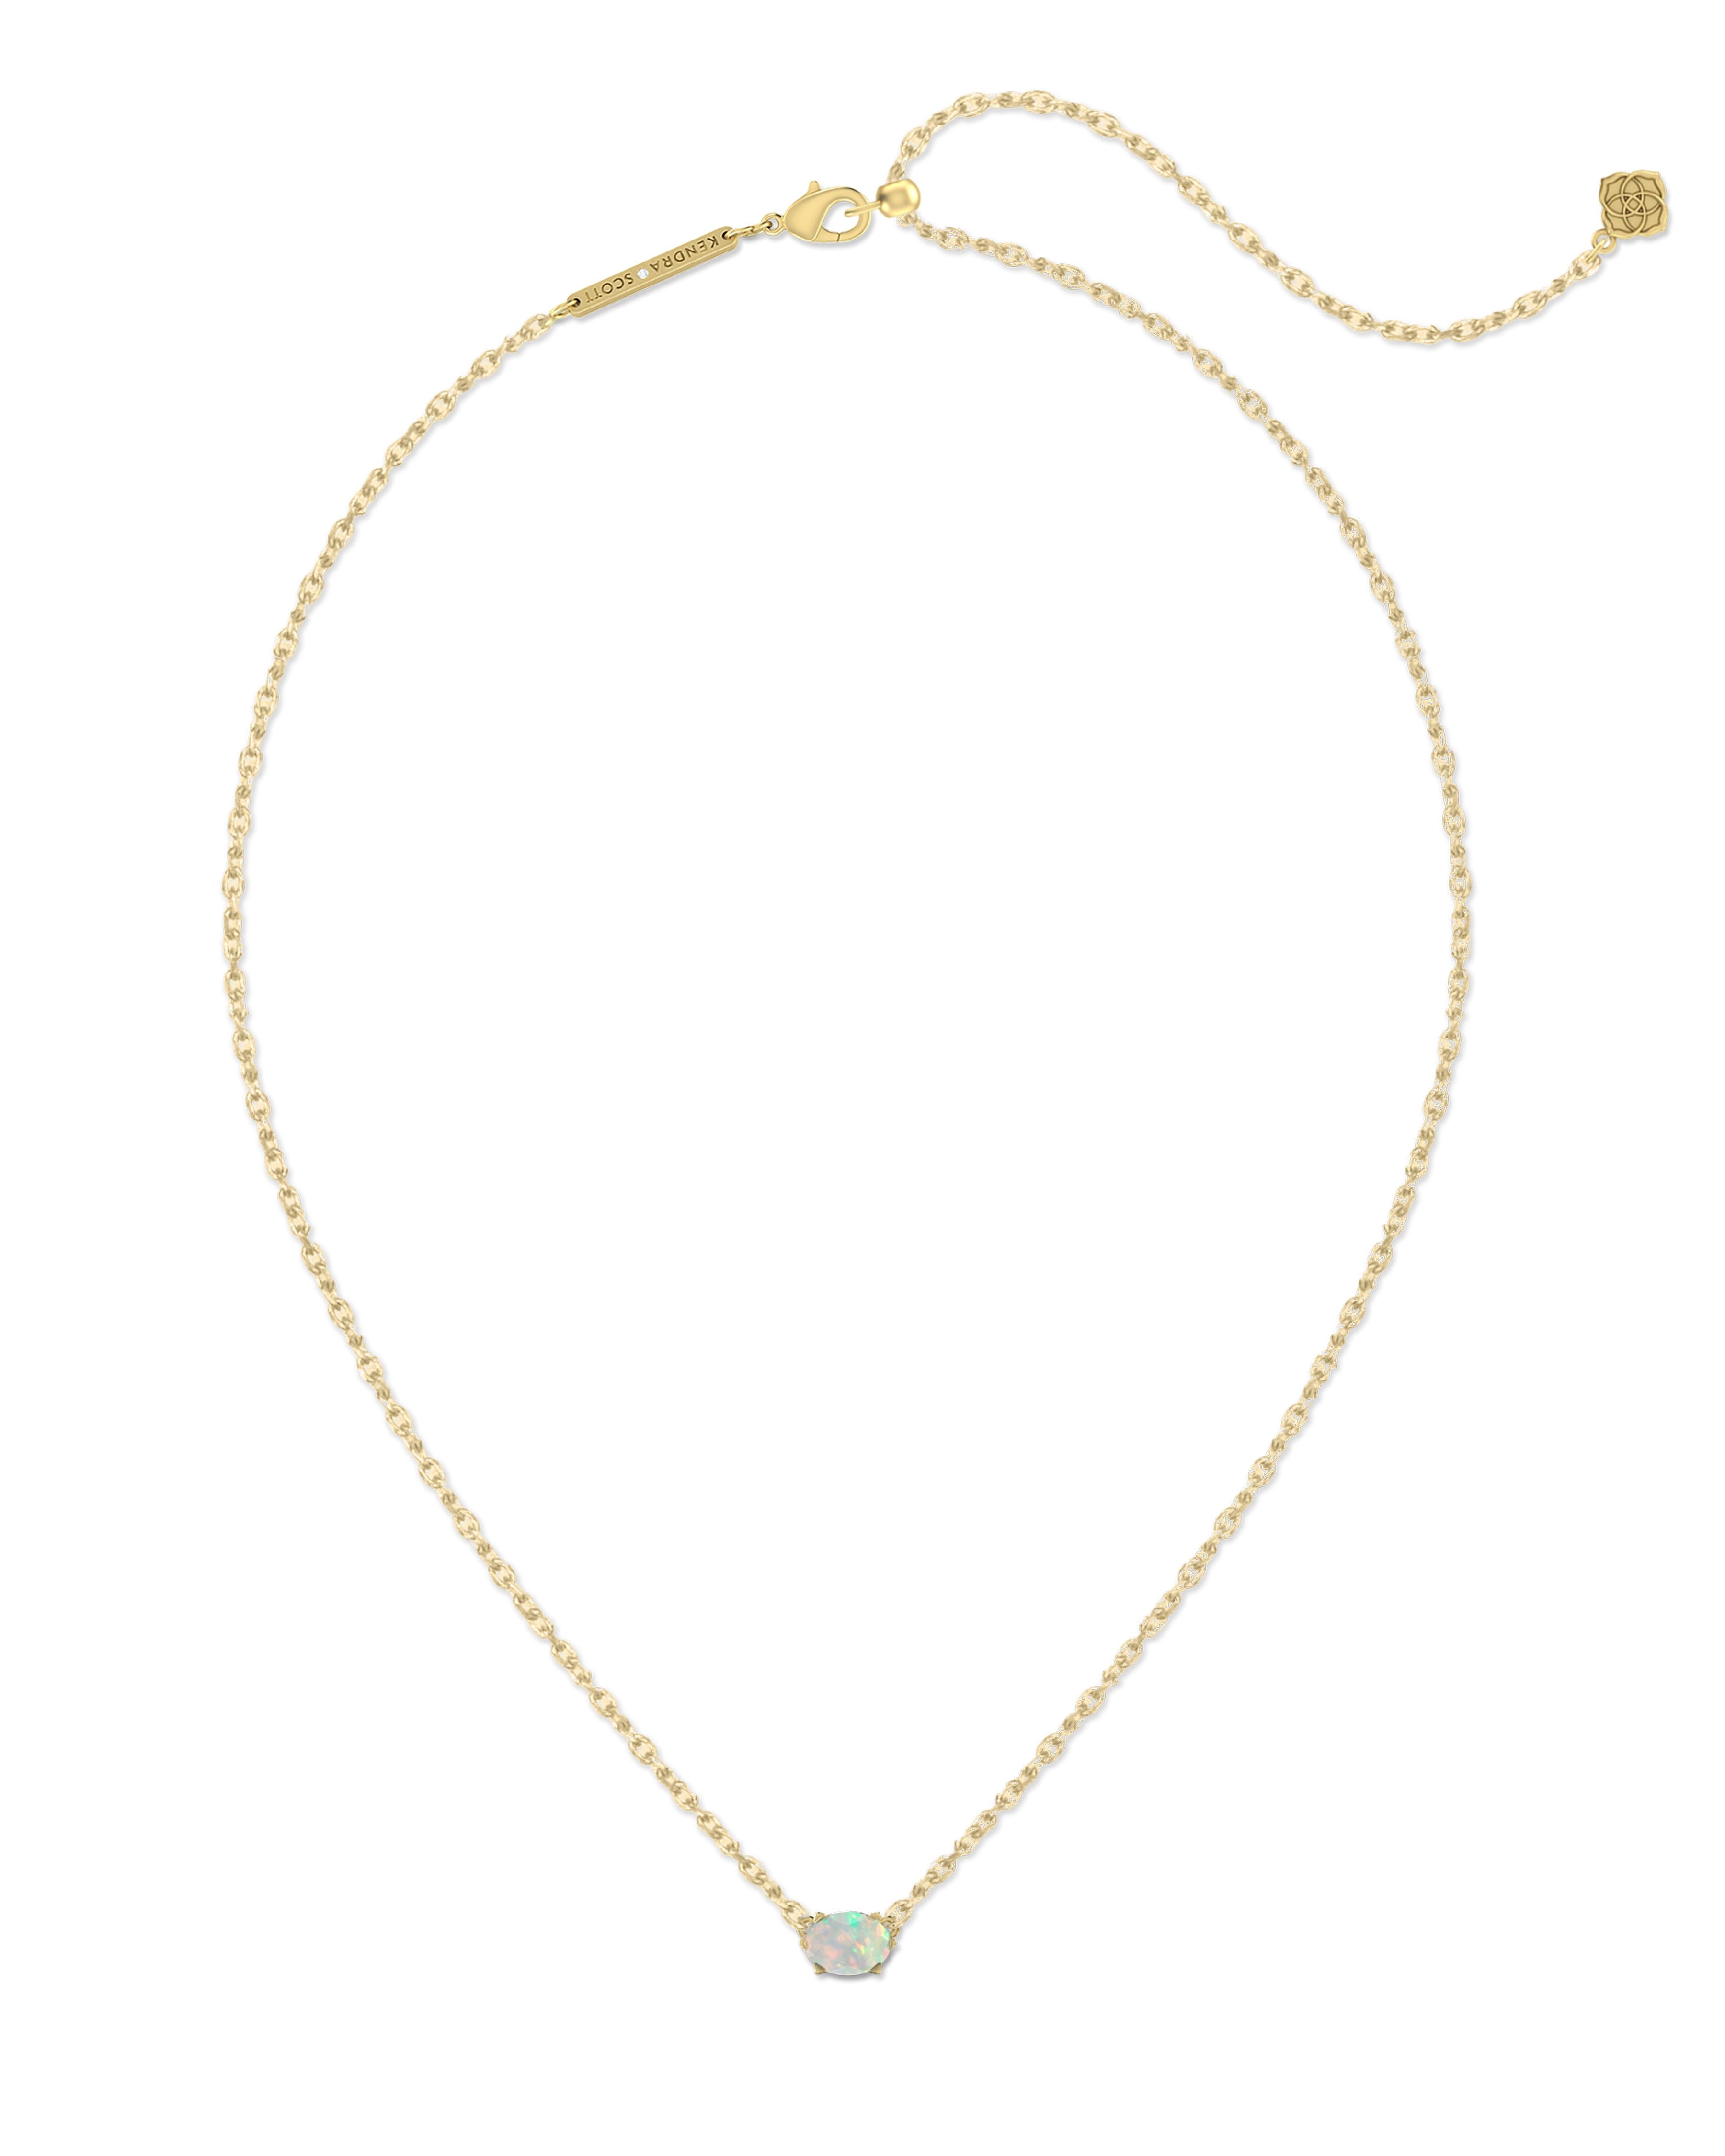 Kendra Scott Cailin Crystal Pendant Necklace Gold Champagne Opal Crystal